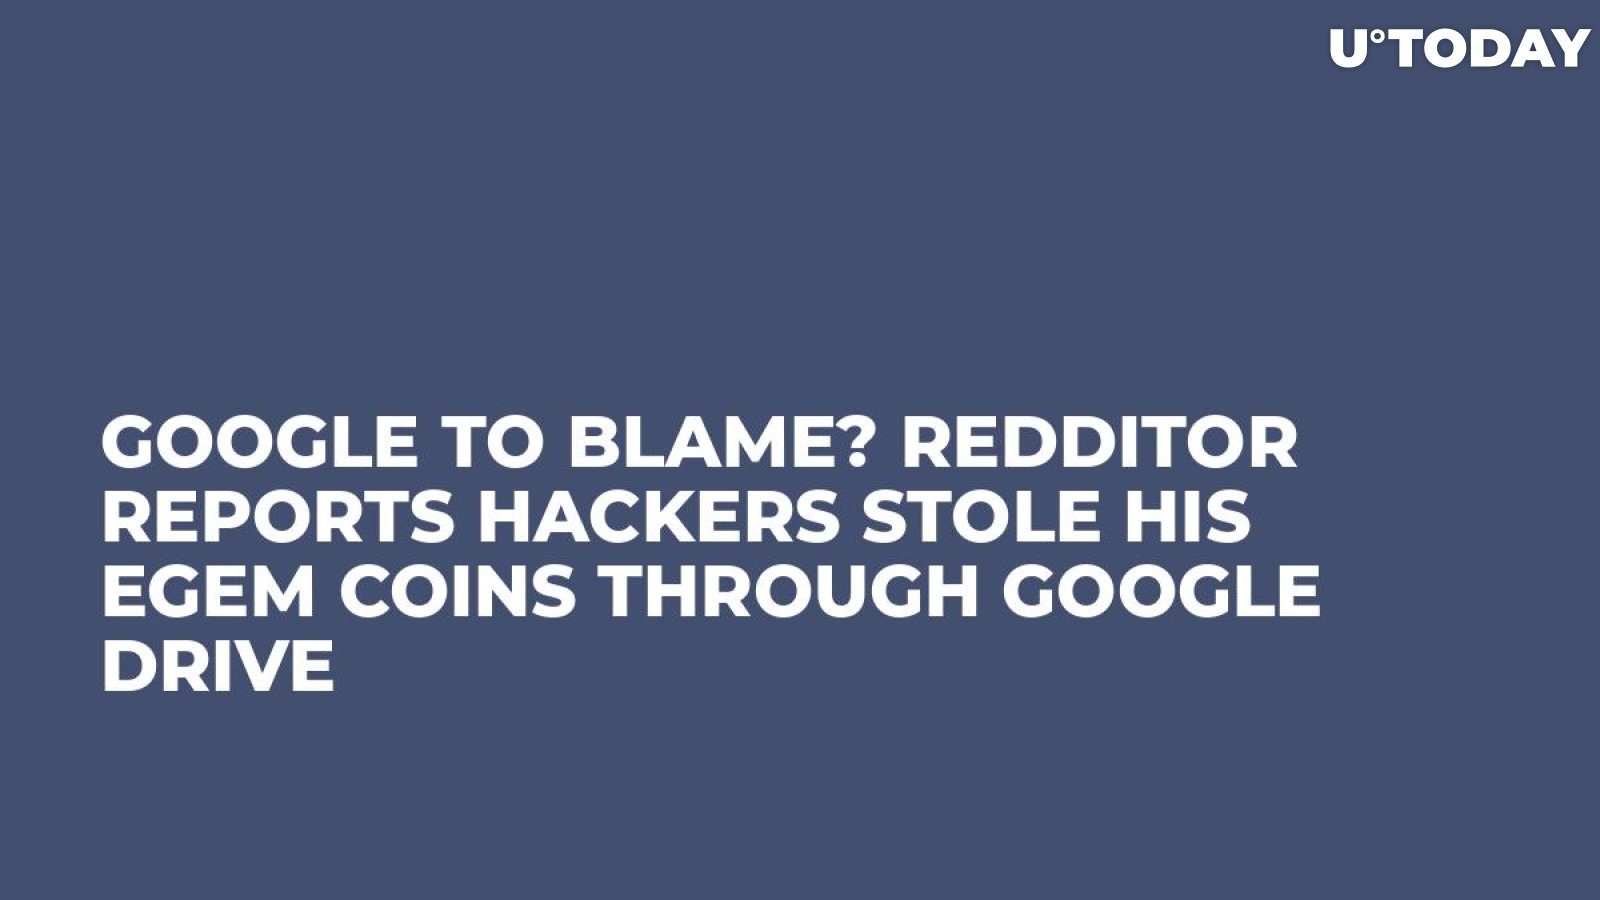 Google to Blame? Redditor Reports Hackers Stole His EGEM Coins Through Google Drive